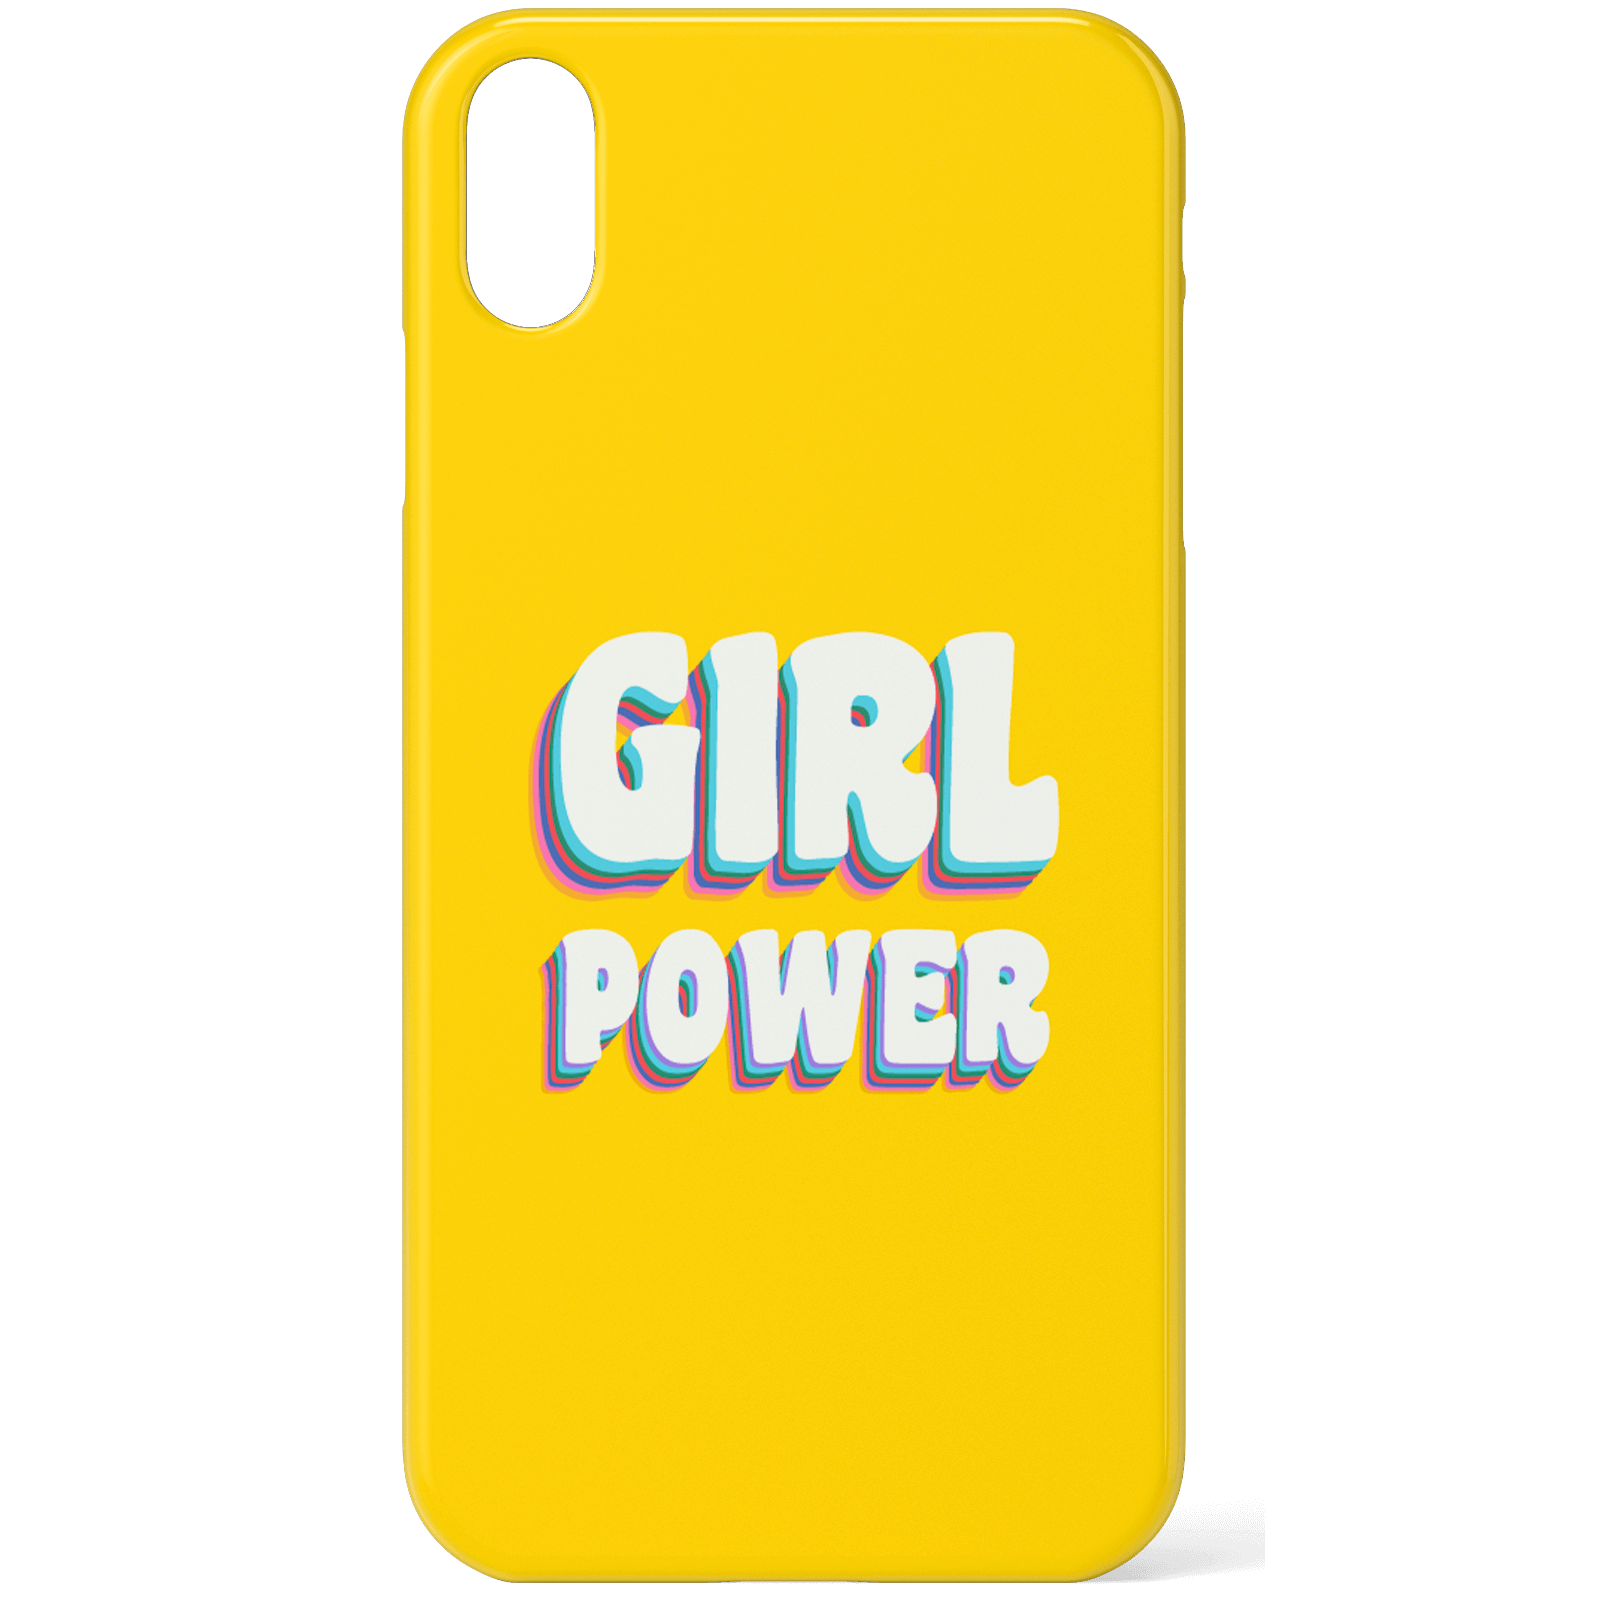 Feminist Girl Power Phone Case for iPhone and Android - iPhone 5/5s - Snap Case - Matte